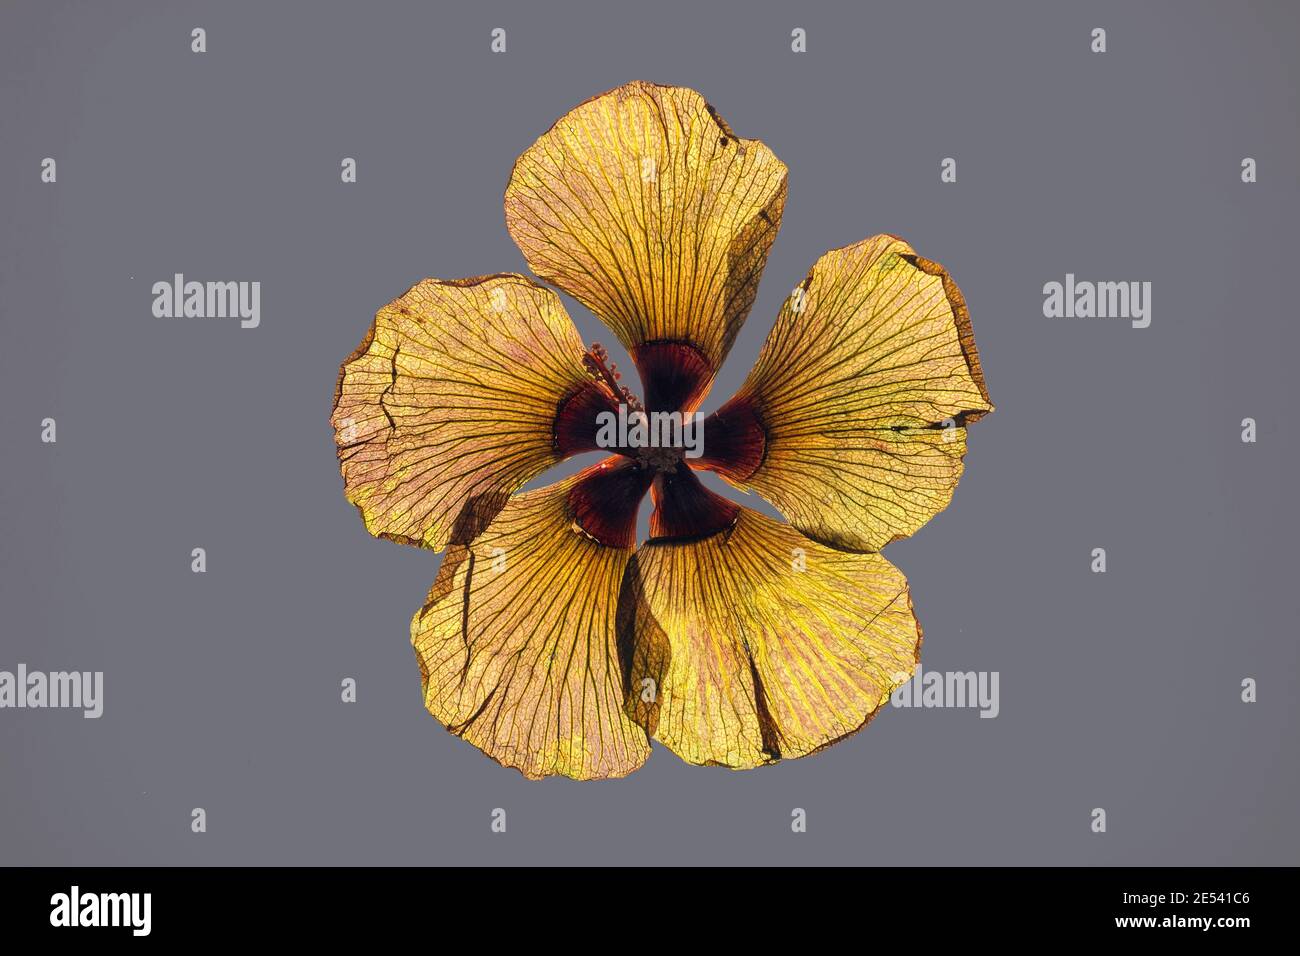 Beach Hibiscus, Hibiscus tiliaceus, pressed dried flower head from the Maldives on a neutral grey background Stock Photo